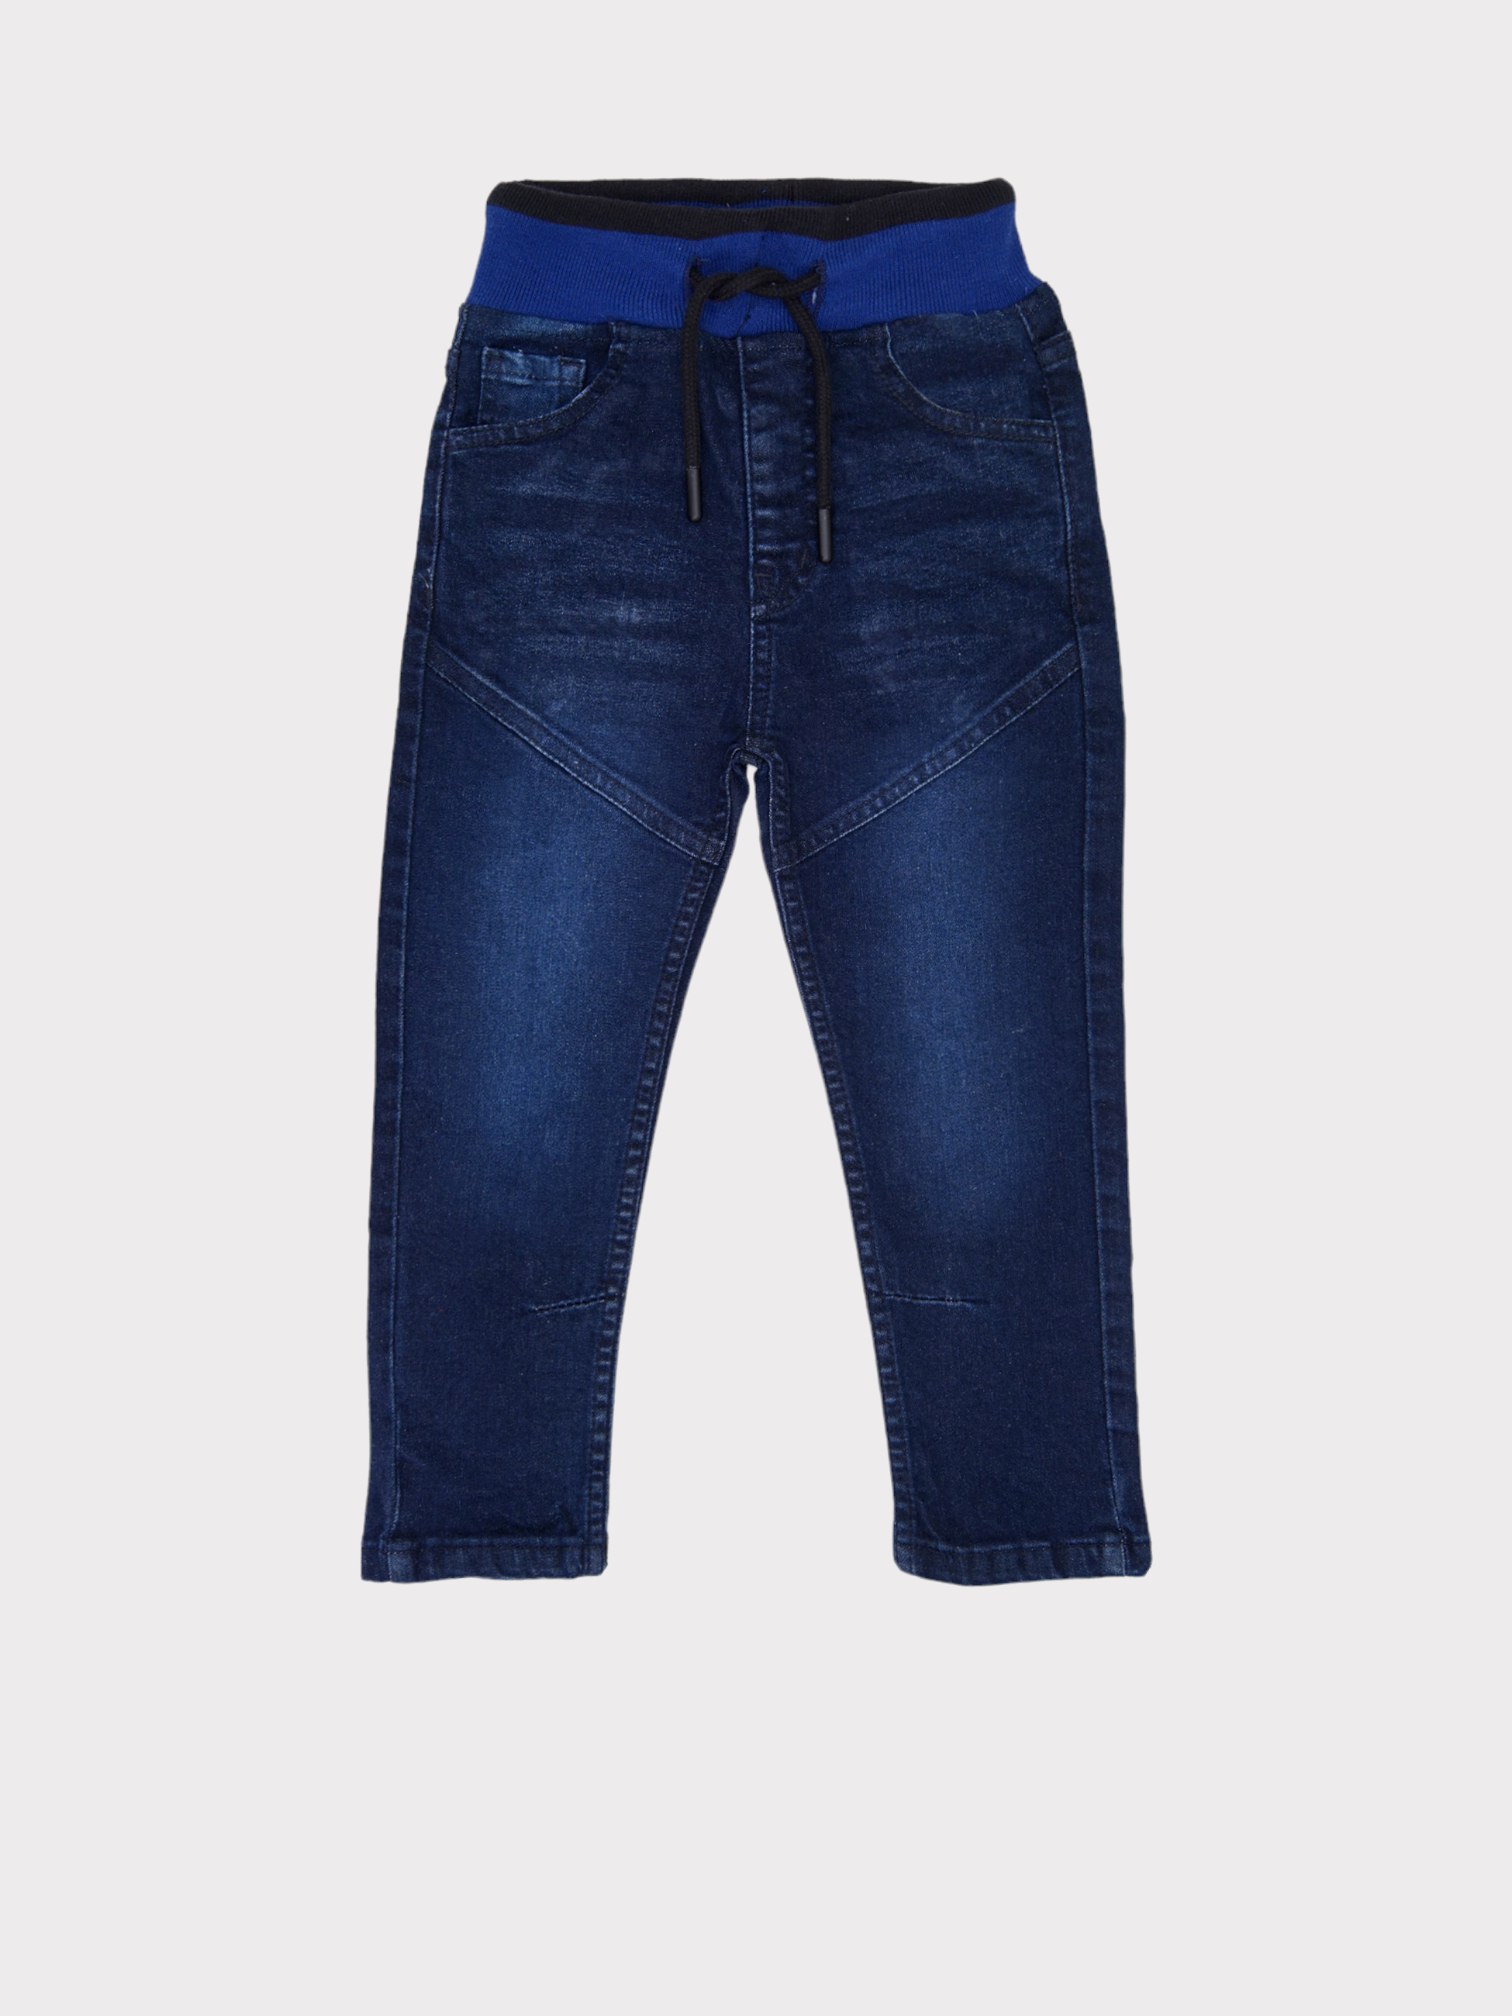 NAVY FADED RIBBED JEANS PANT